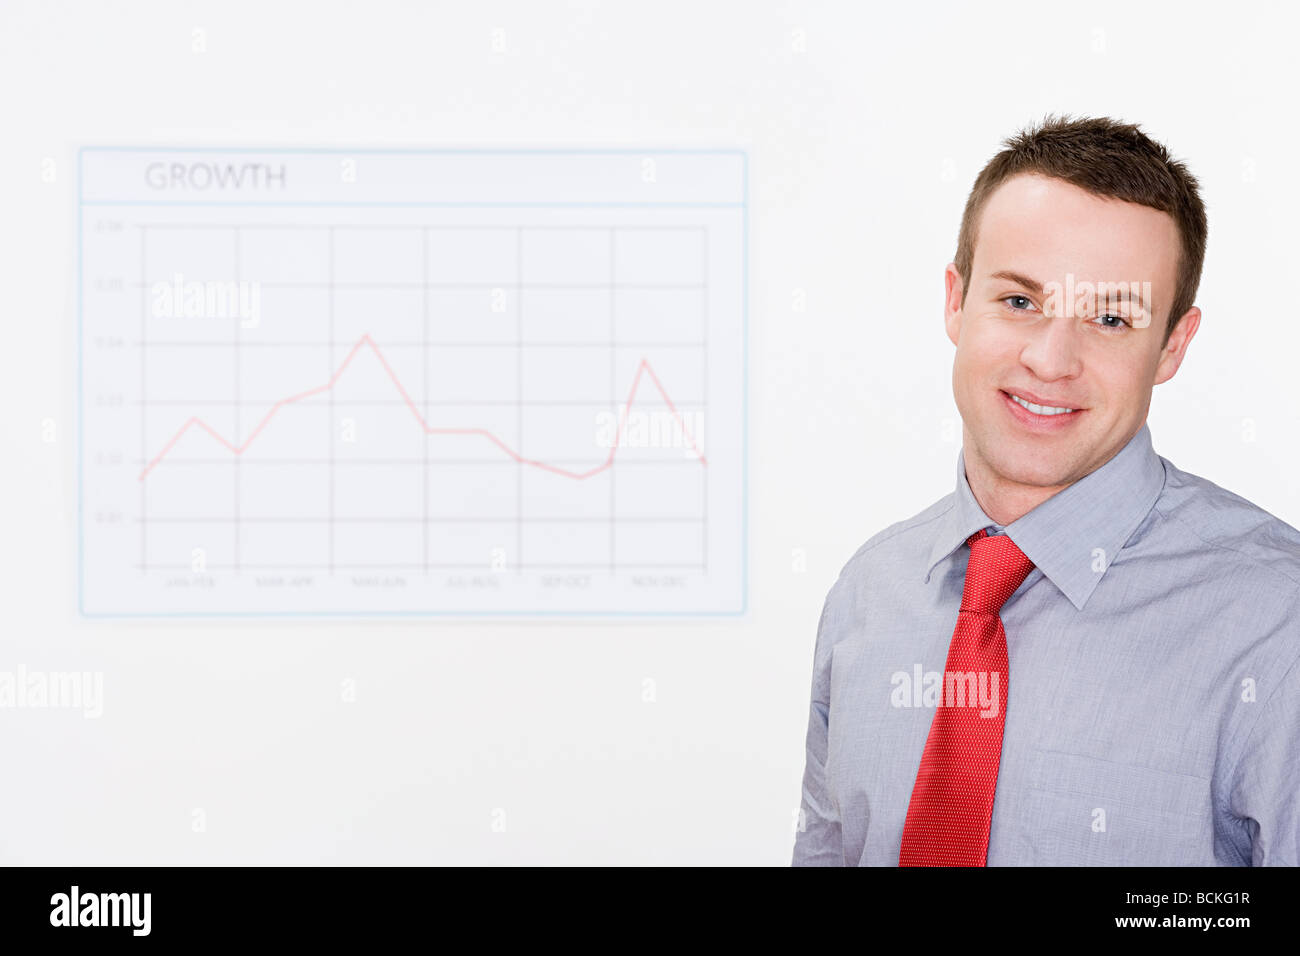 Office worker with graph Stock Photo